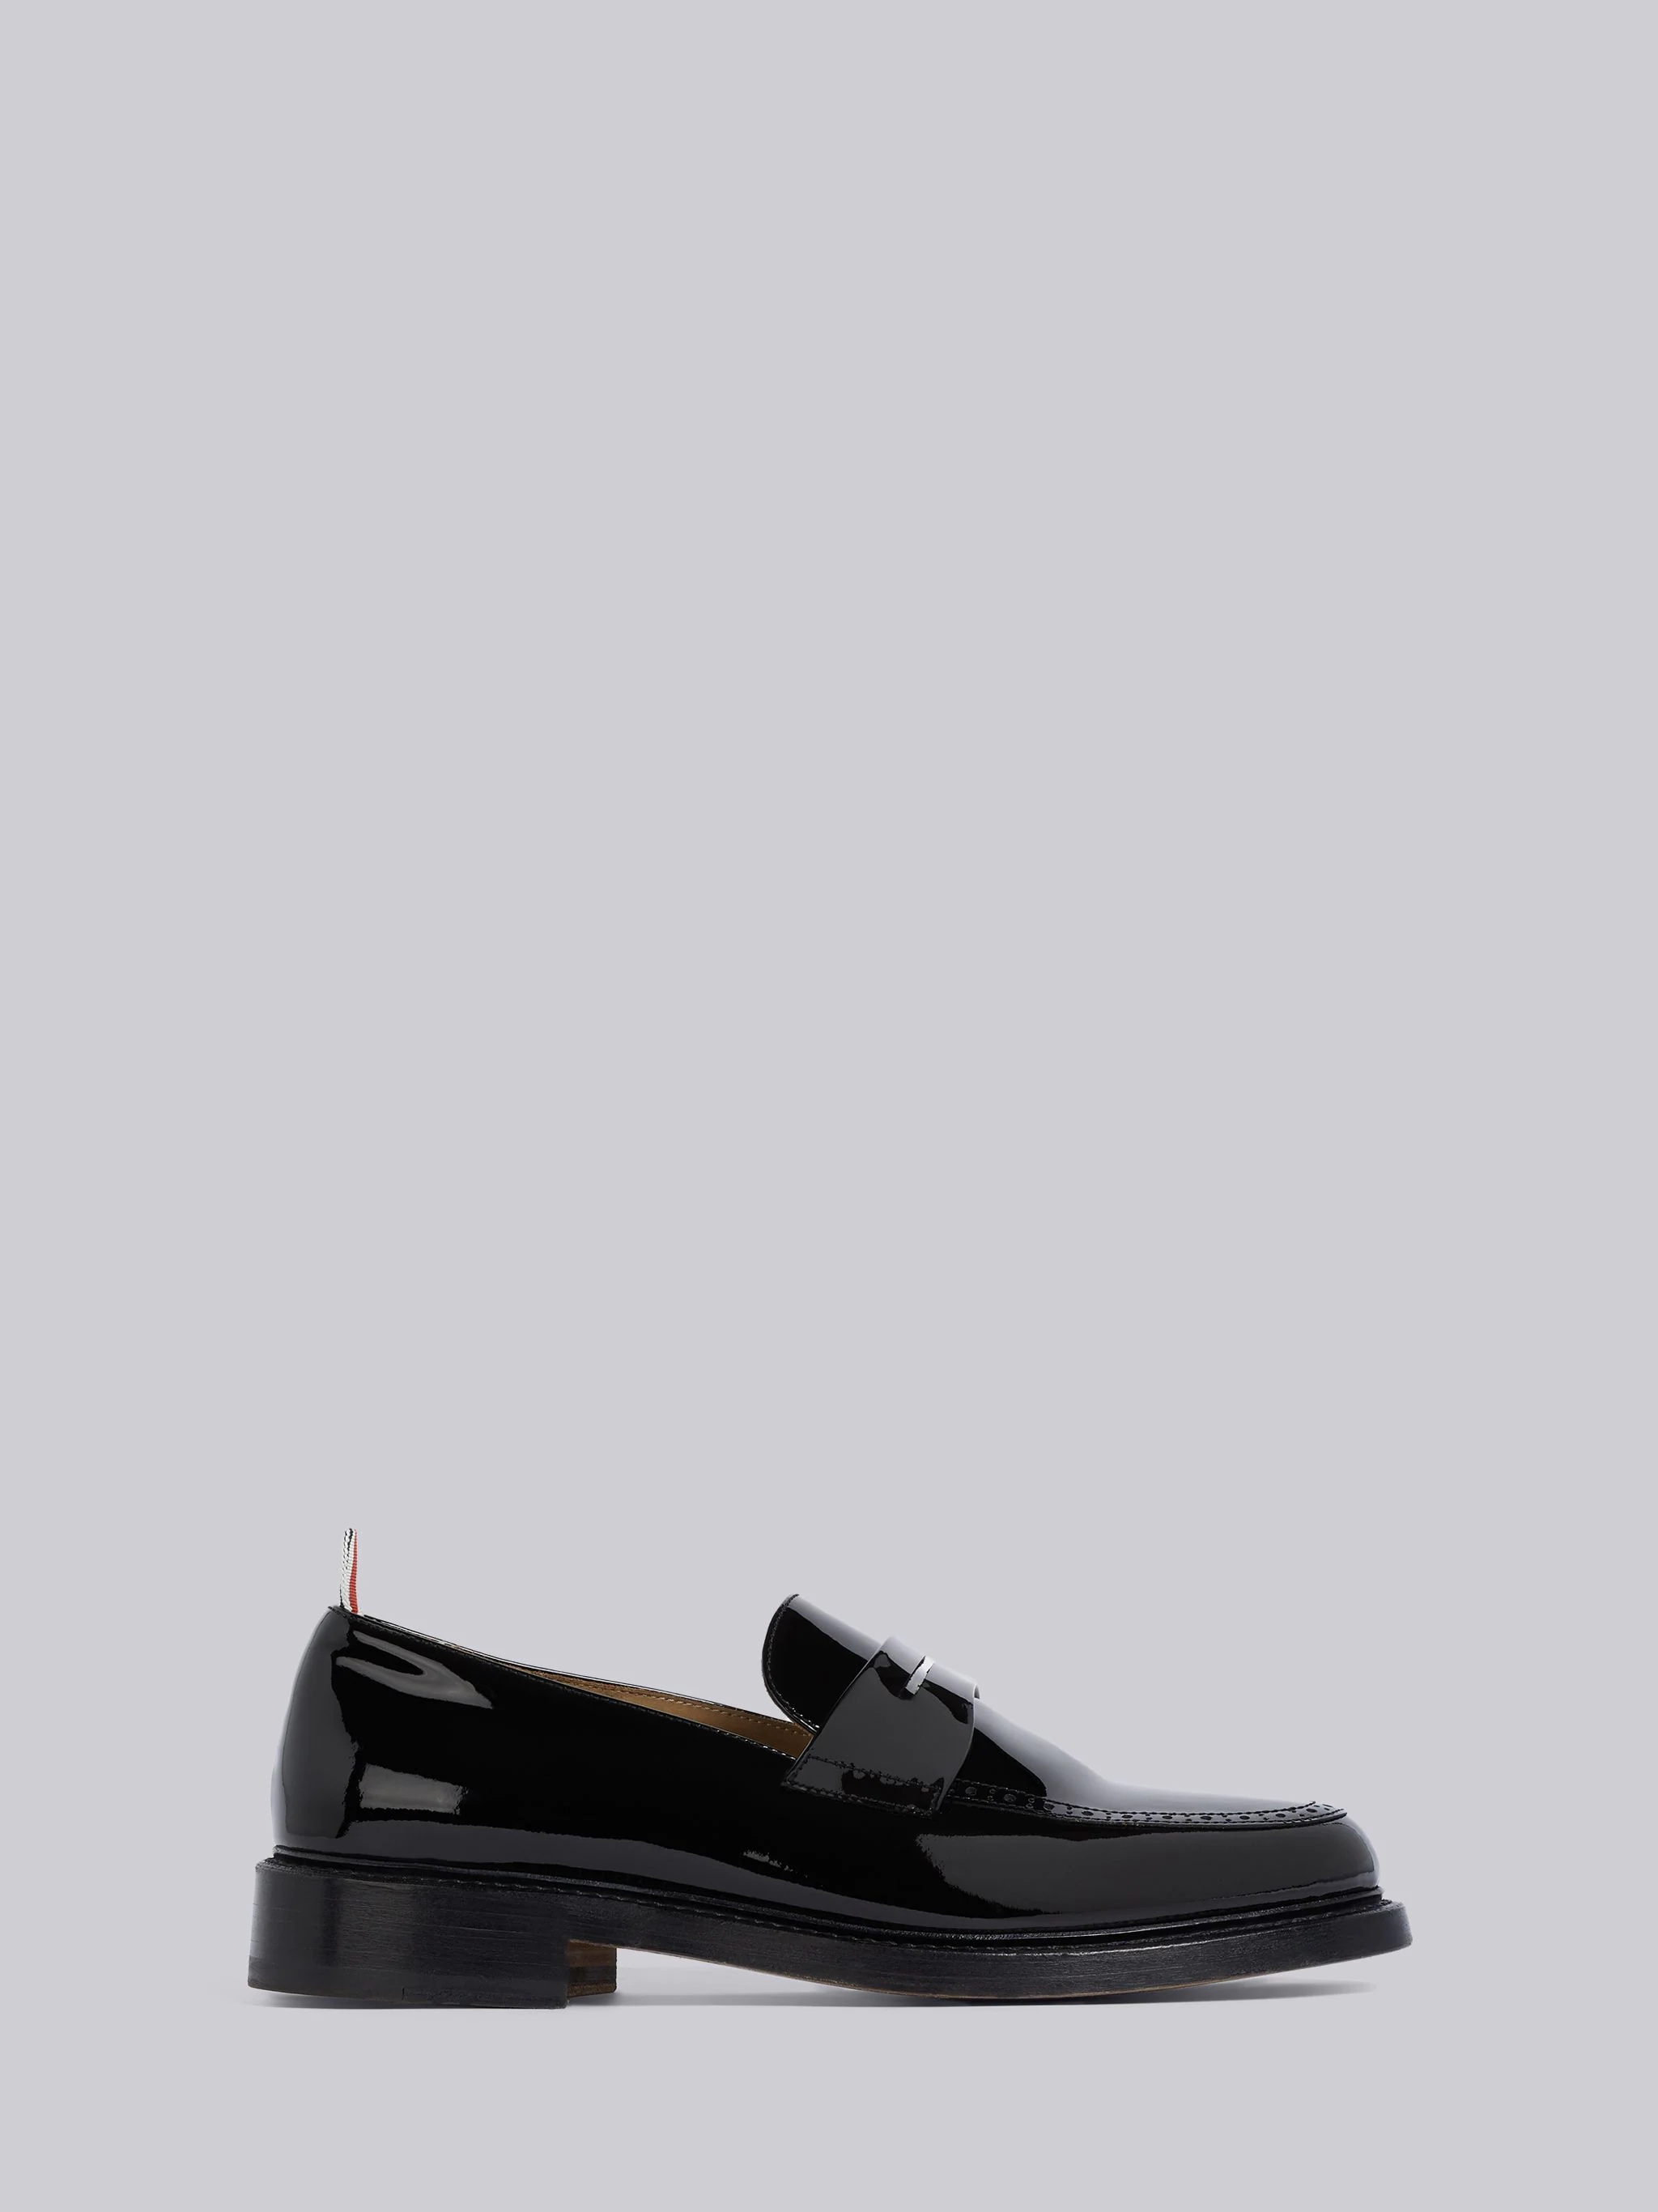 Black Patent Leather Penny Loafer - 1